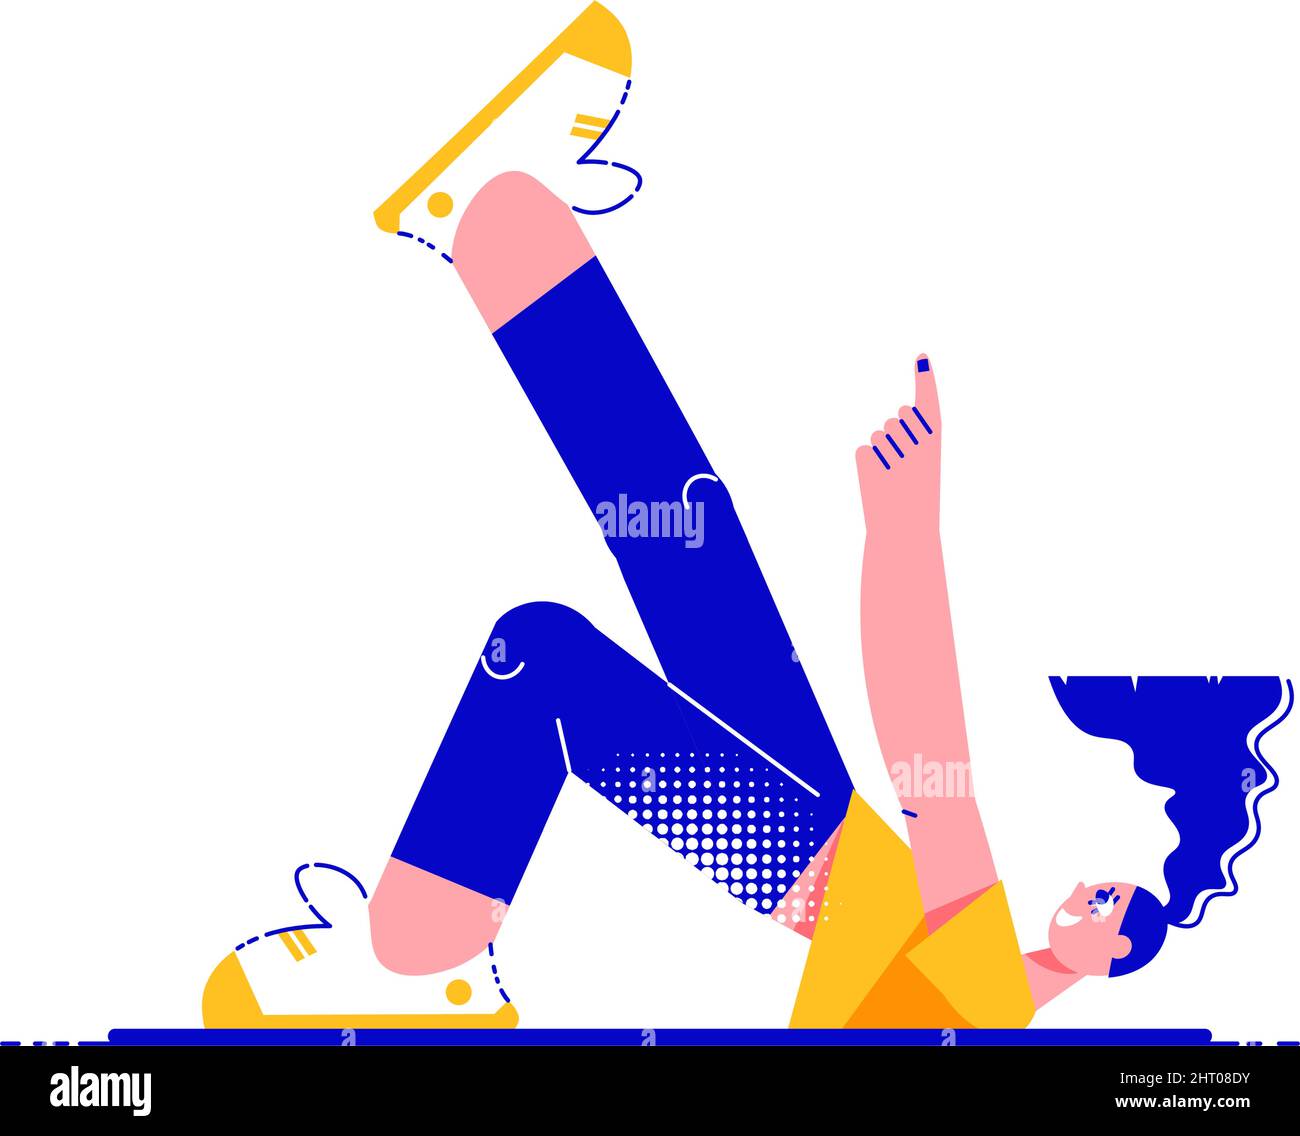 Fitness People Flat Composition With Female Character Spreading Her Legs Up Vector Illustration